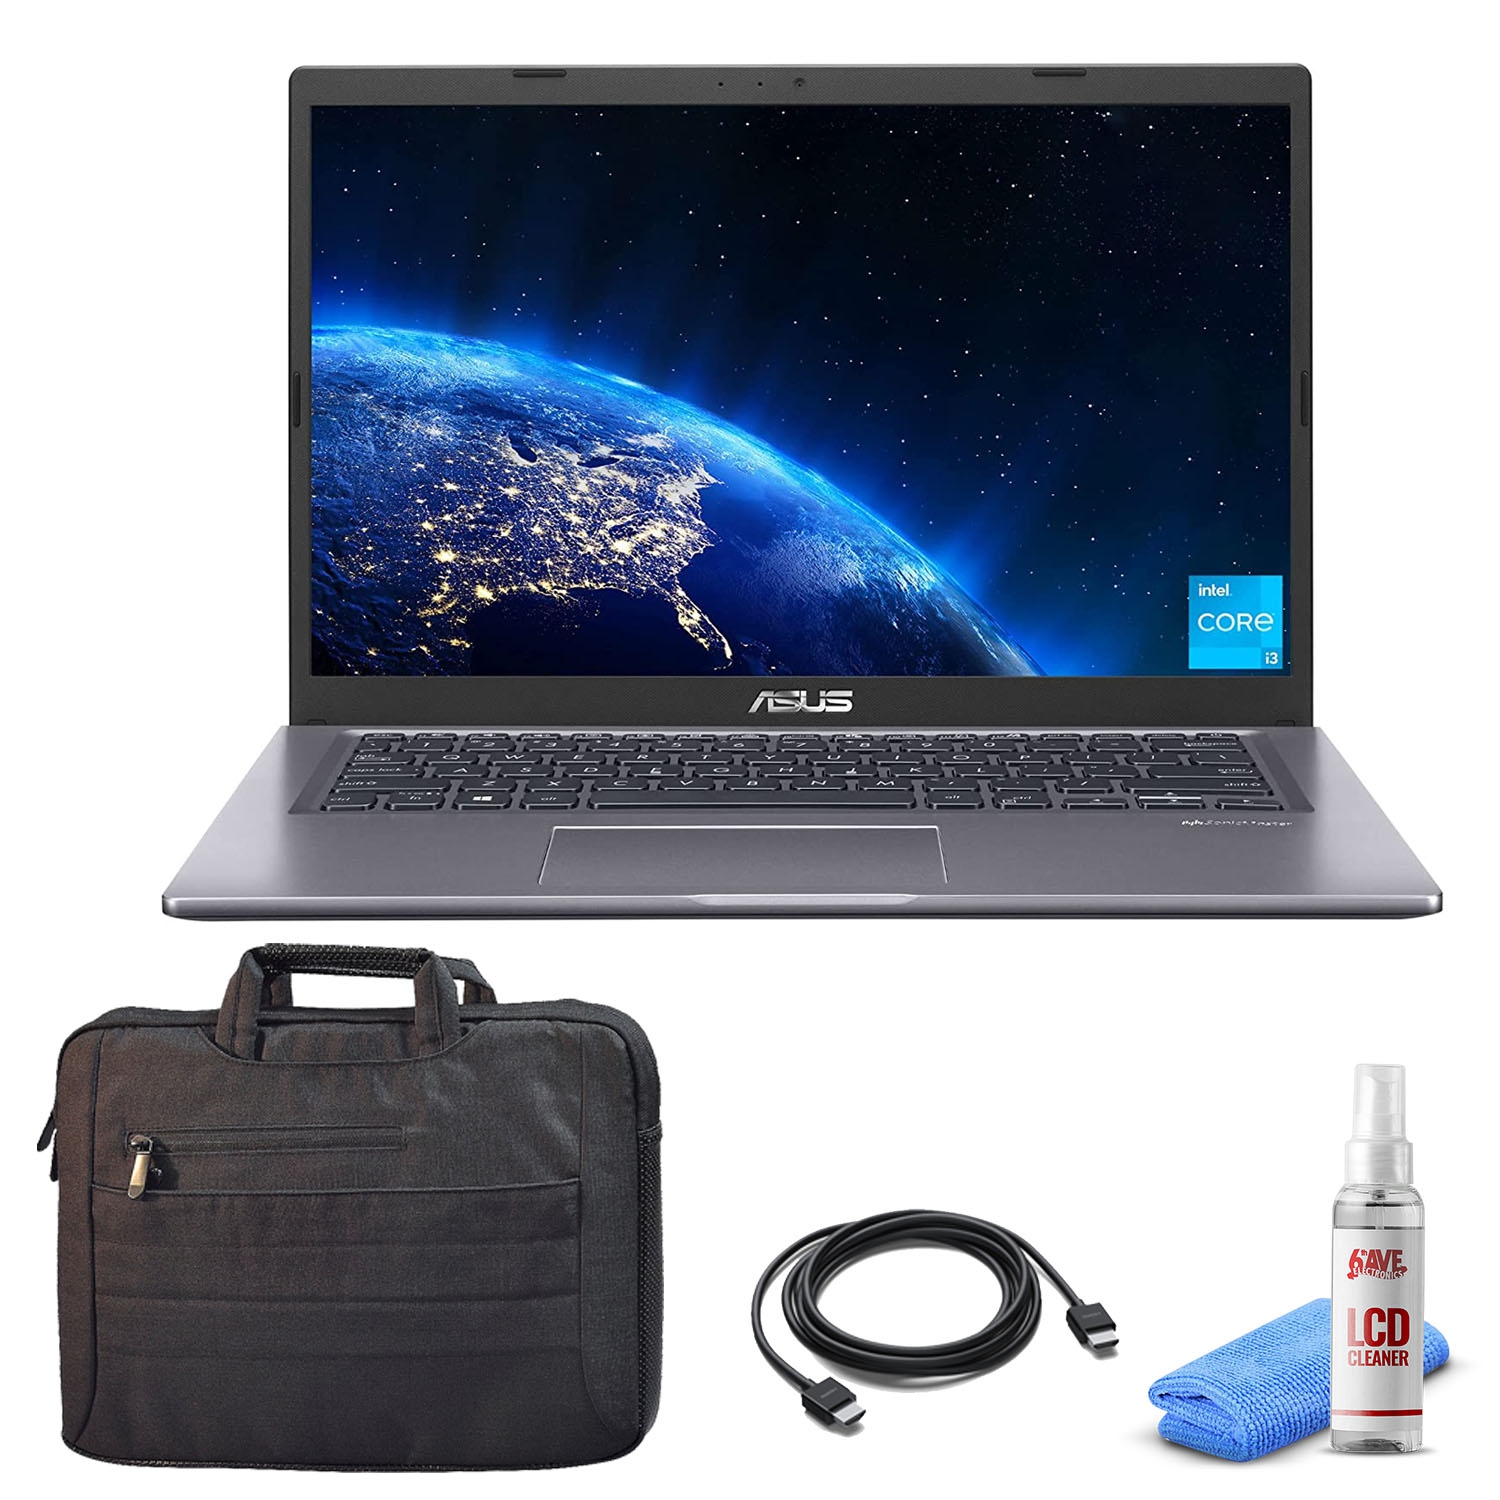 ASUS VivoBook 14 Laptop with Laptop Carrying Case and HDMI cable (F415EA-AS31)